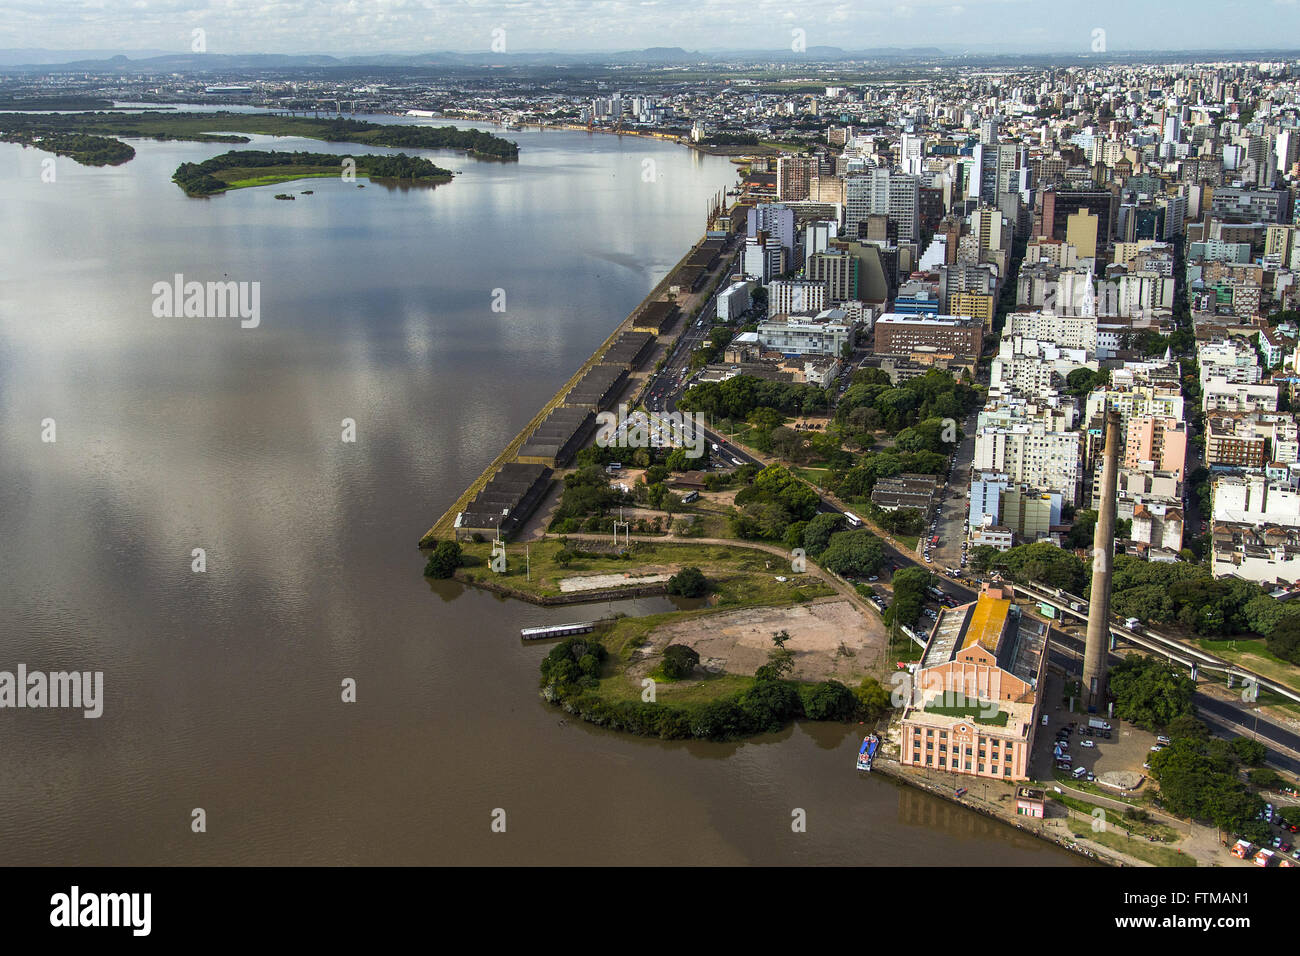 Aerial view of the port area on the banks of the Rio Guaiba Stock Photo